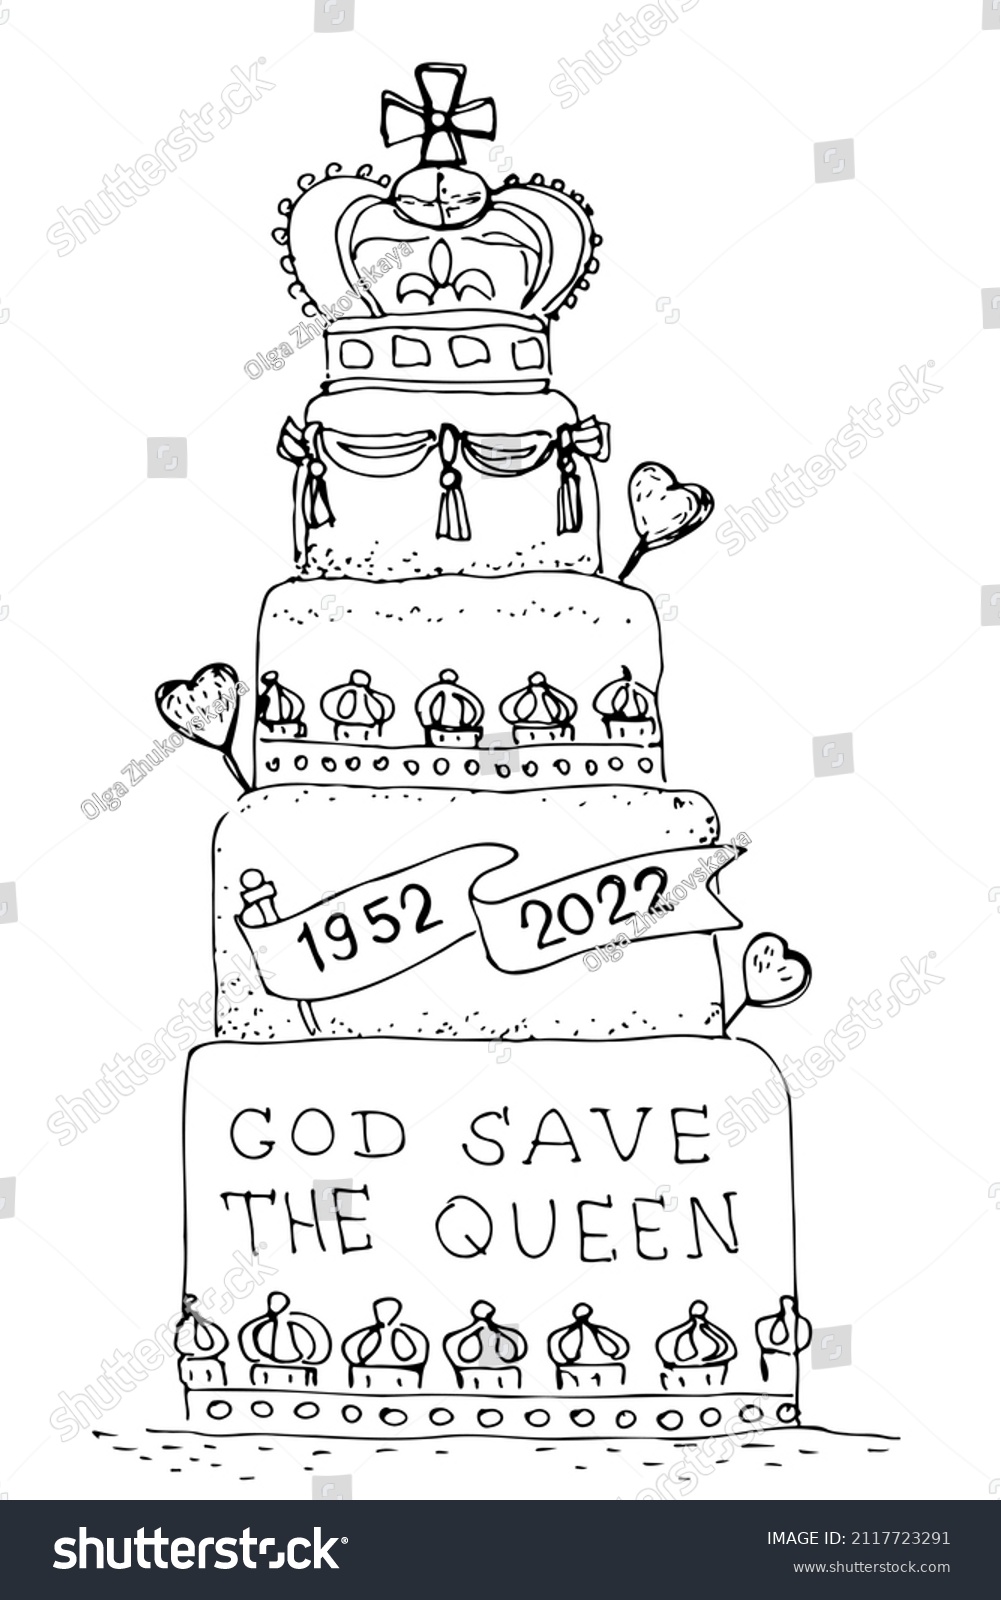 SVG of Cake to Queen jubilee. 'God save the Queen' slogan on cake. British Holiday party cake. Hand drawn vector illustration. svg